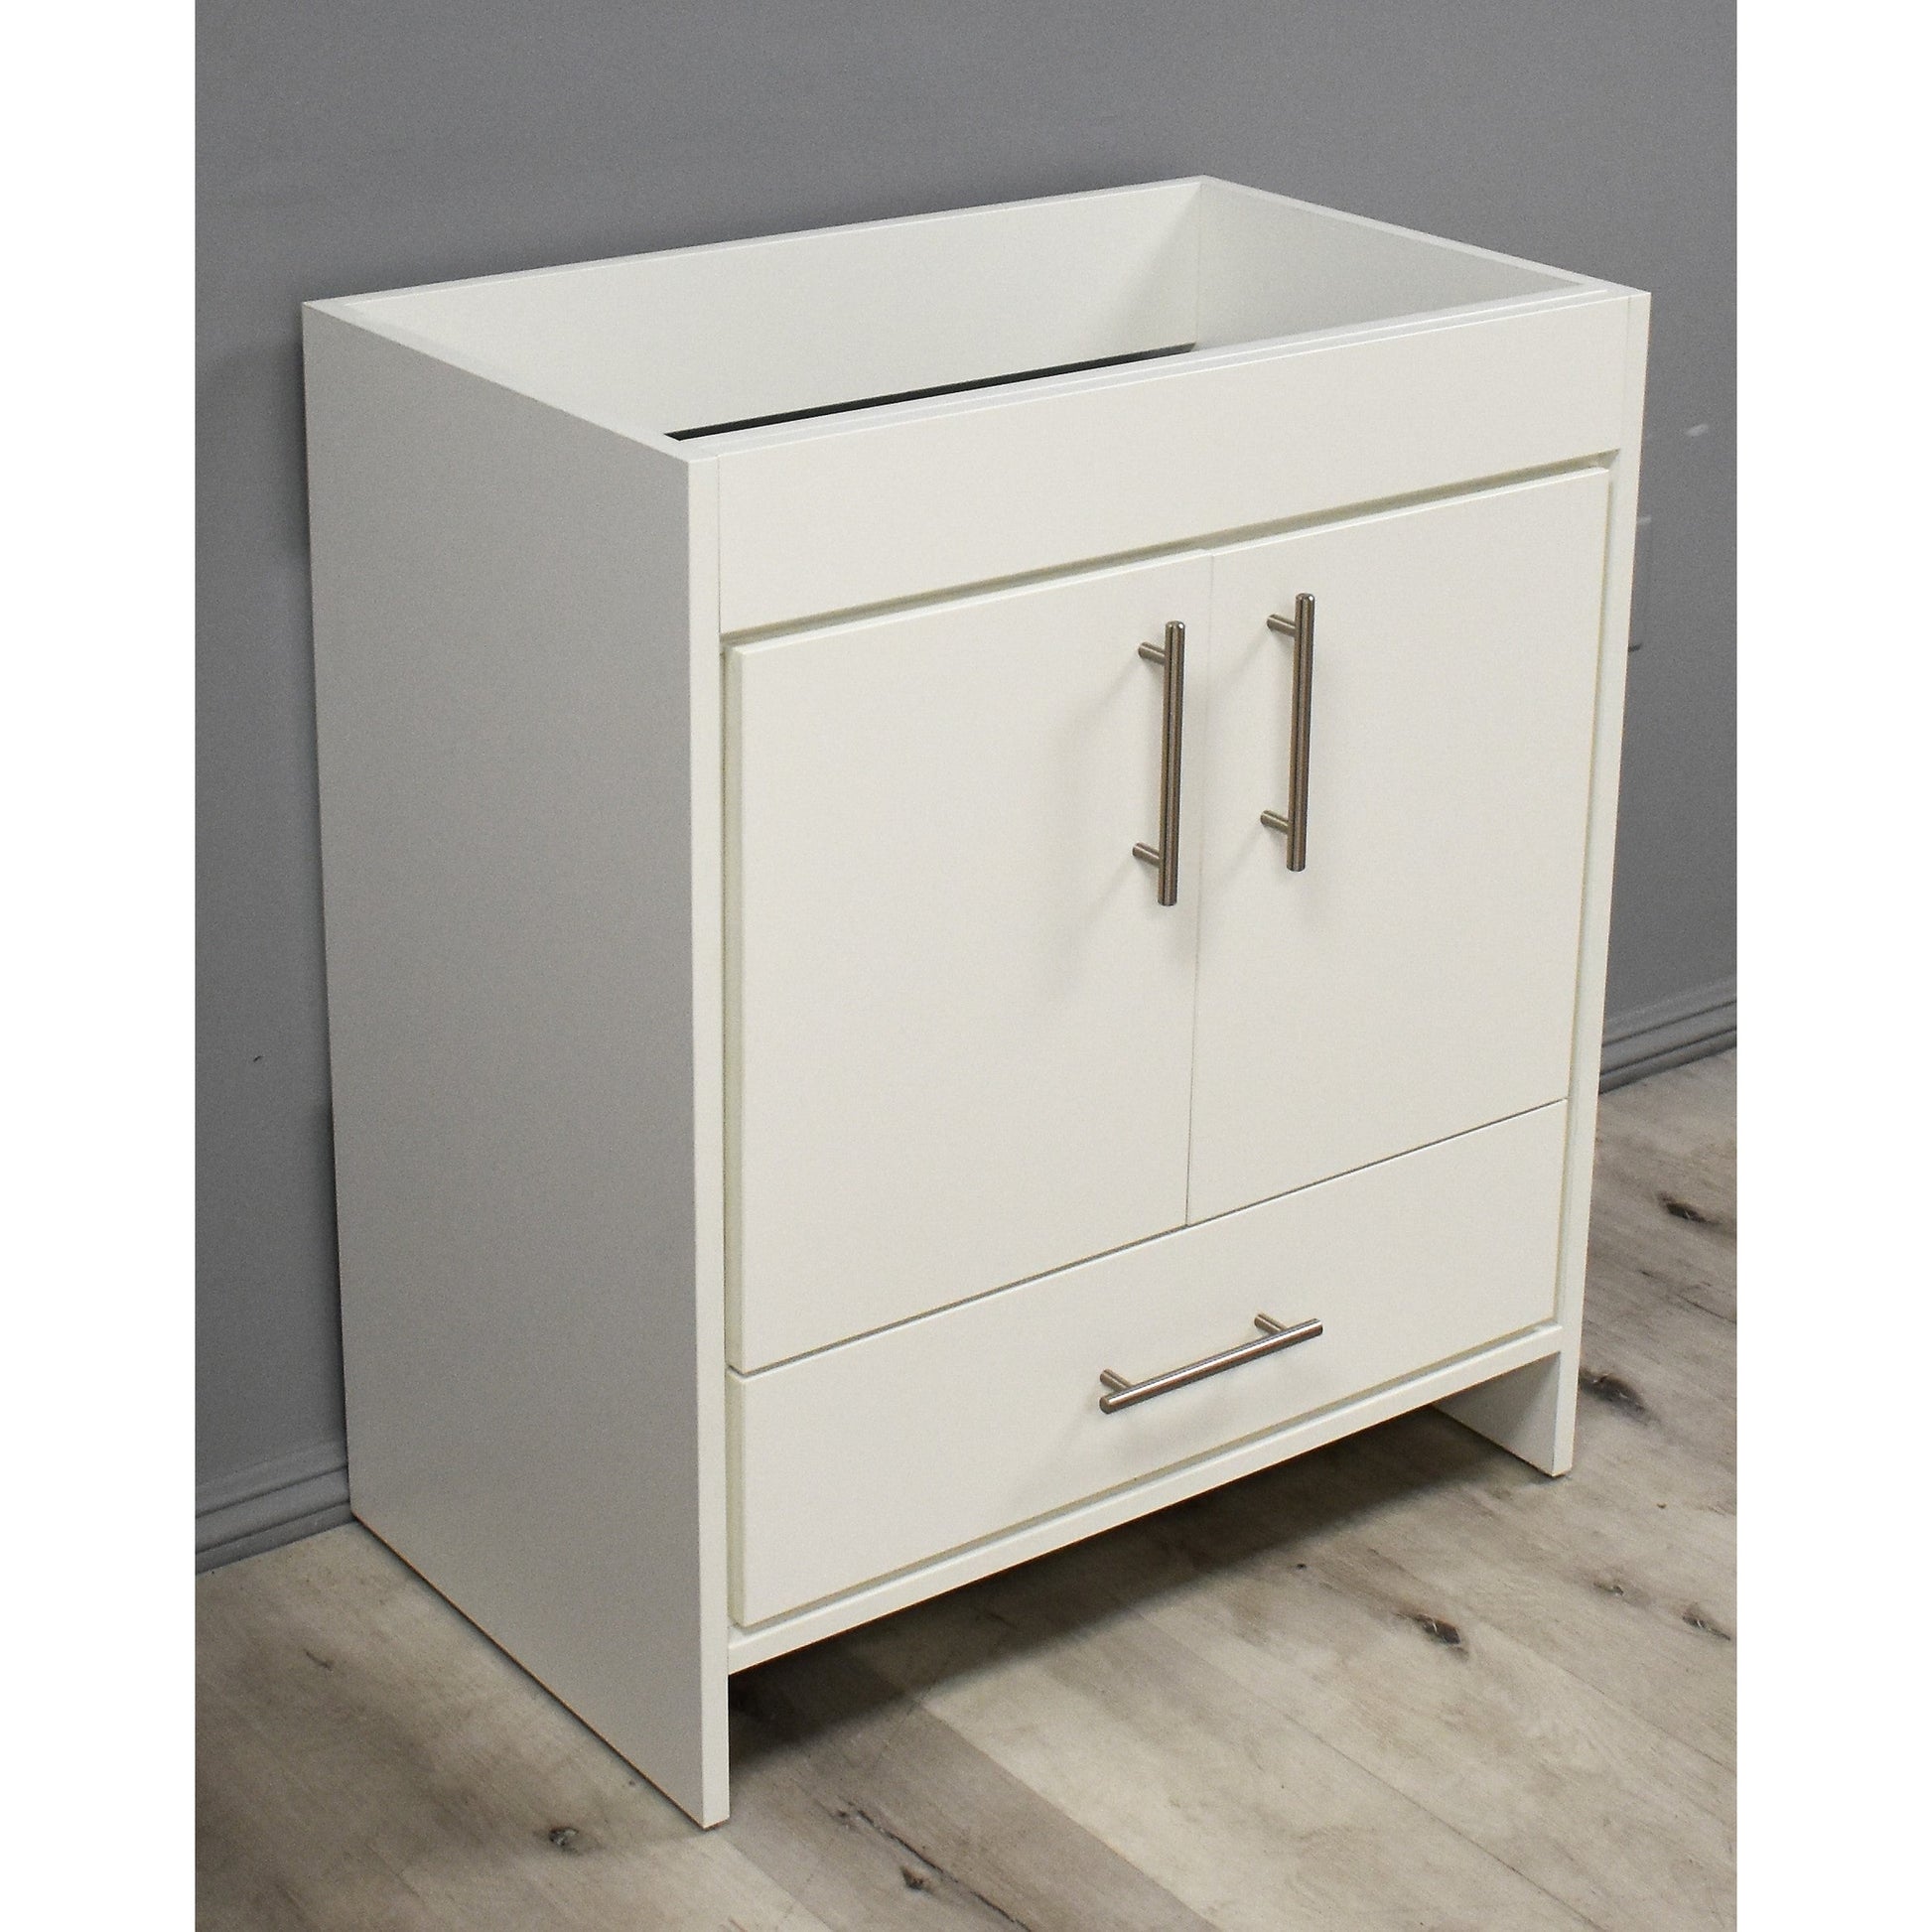 Volpa USA Pacific 30" Soft White Freestanding Modern Bathroom Vanity With Brushed Nickel Round Handles Cabinet Only